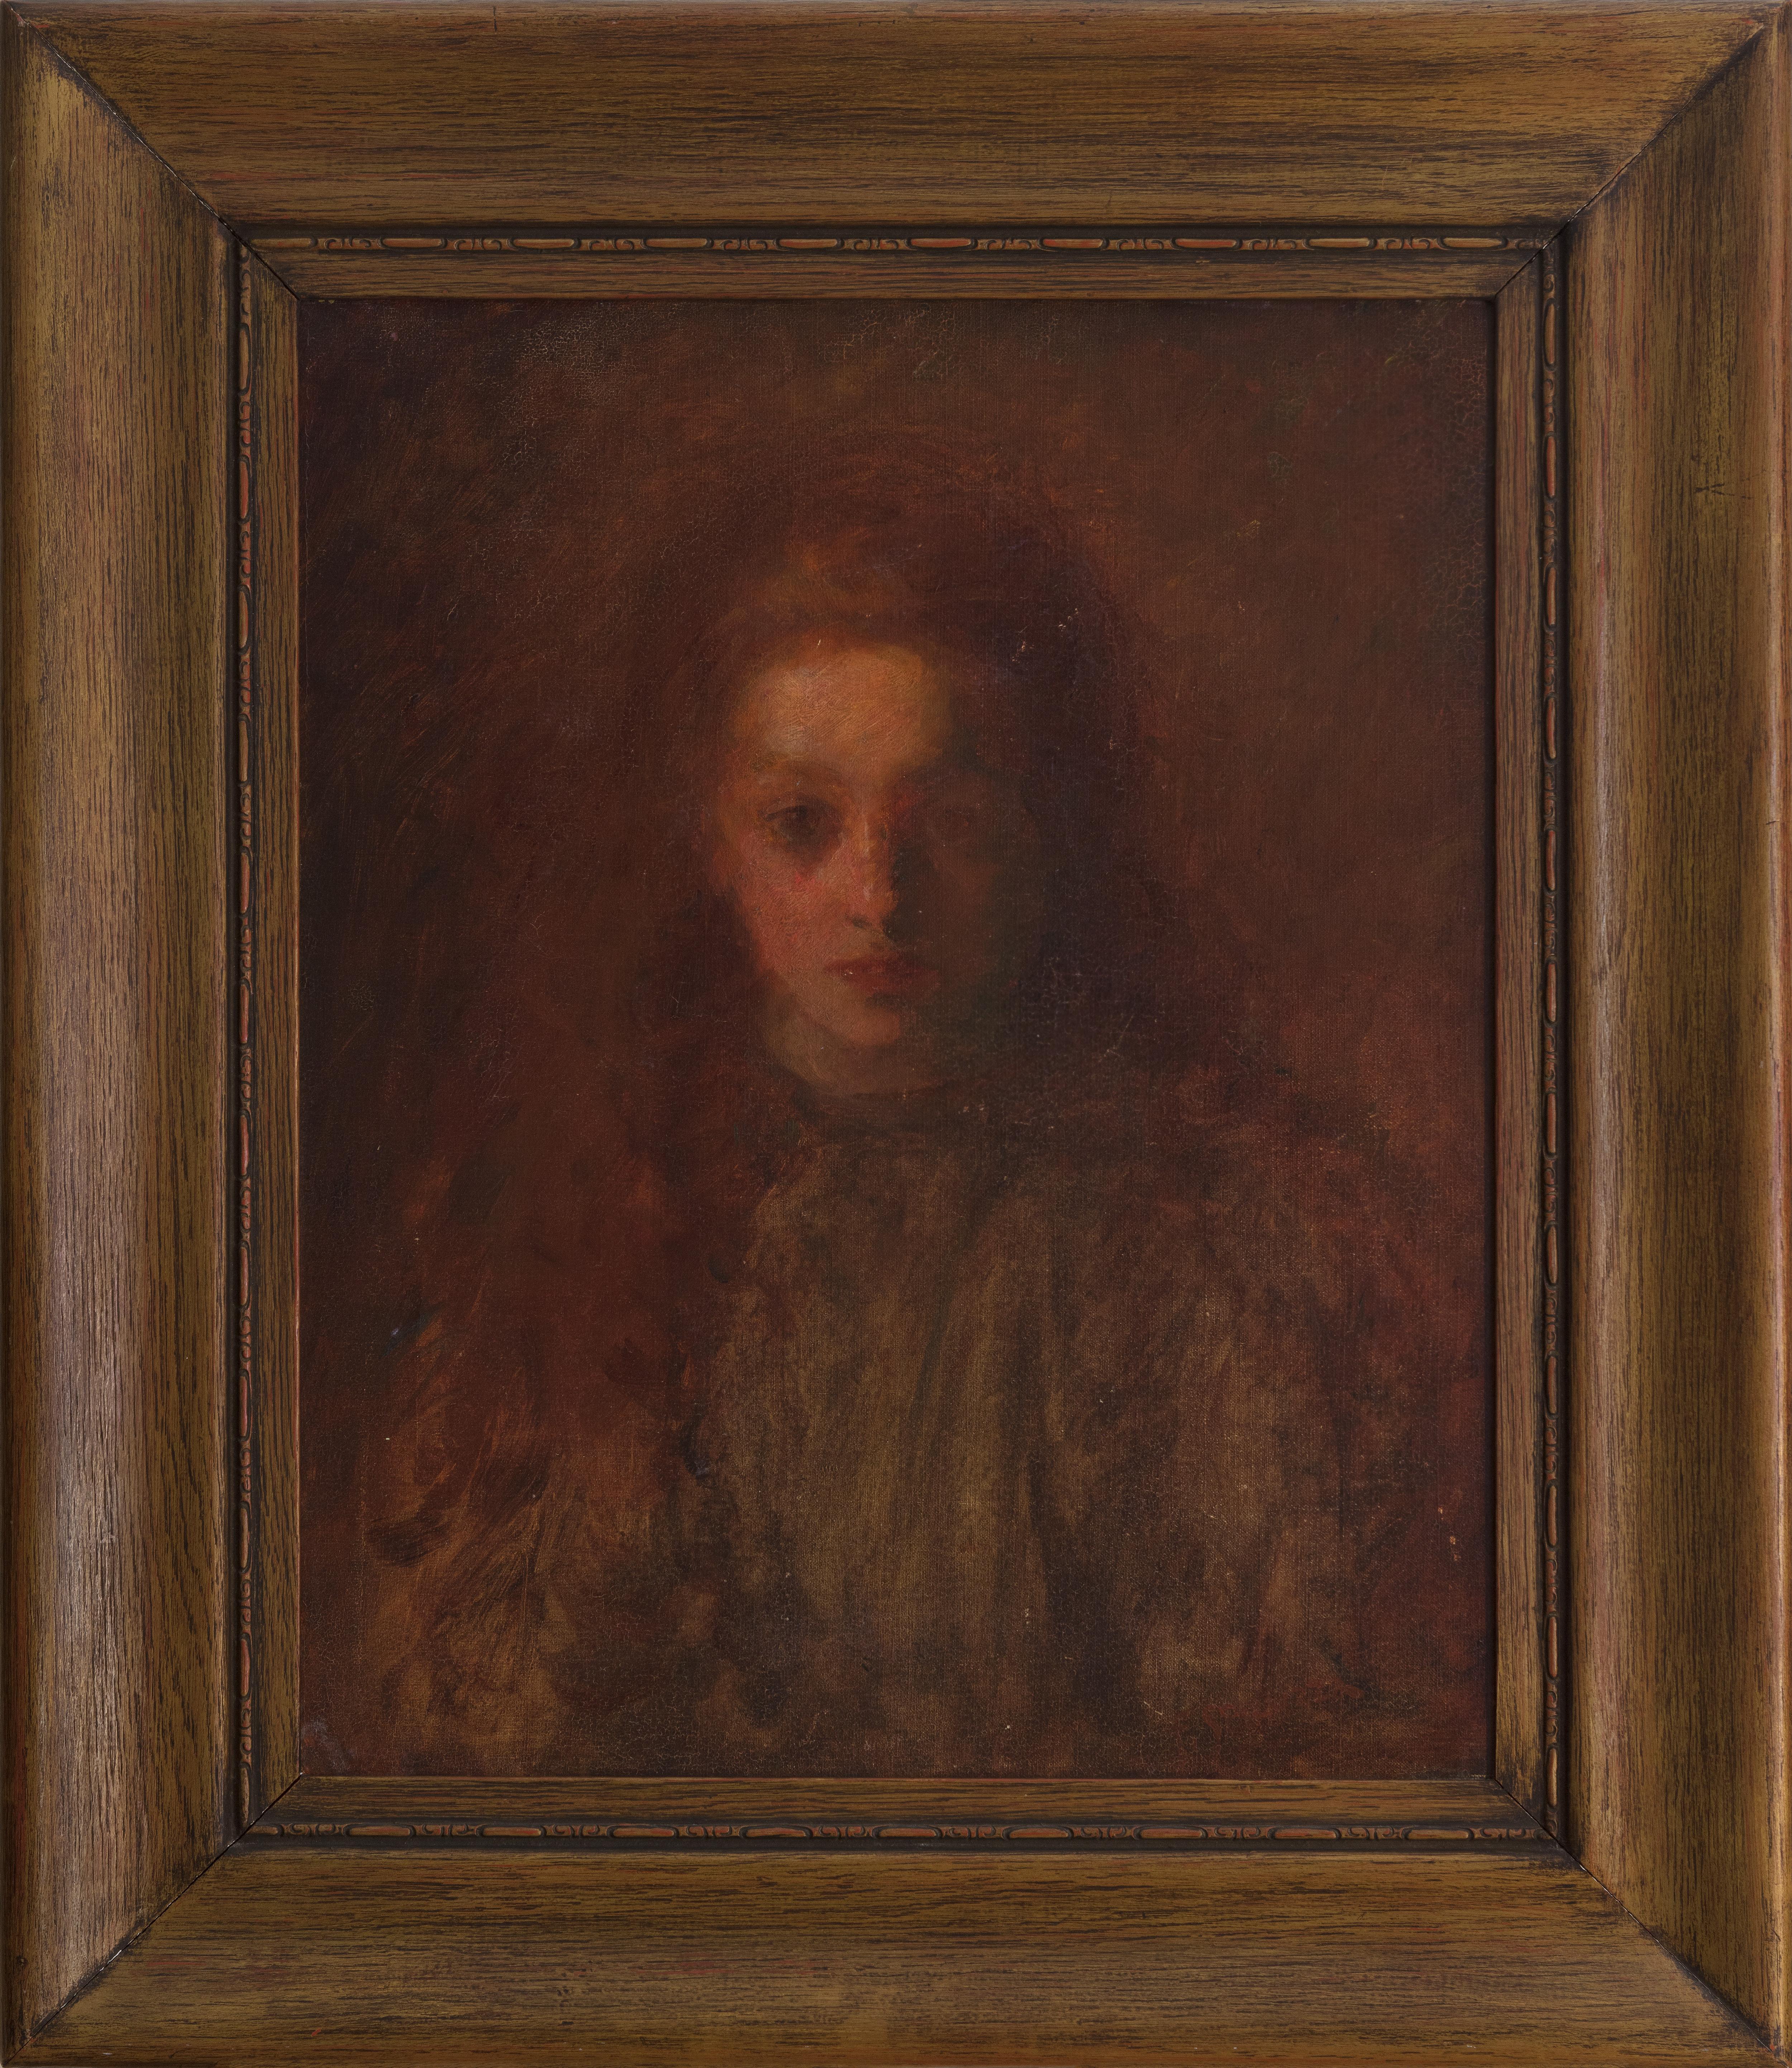 'Little Mary Spicuzza' signed oil painting of the artist's niece - Brown Portrait Painting by Francesco Spicuzza